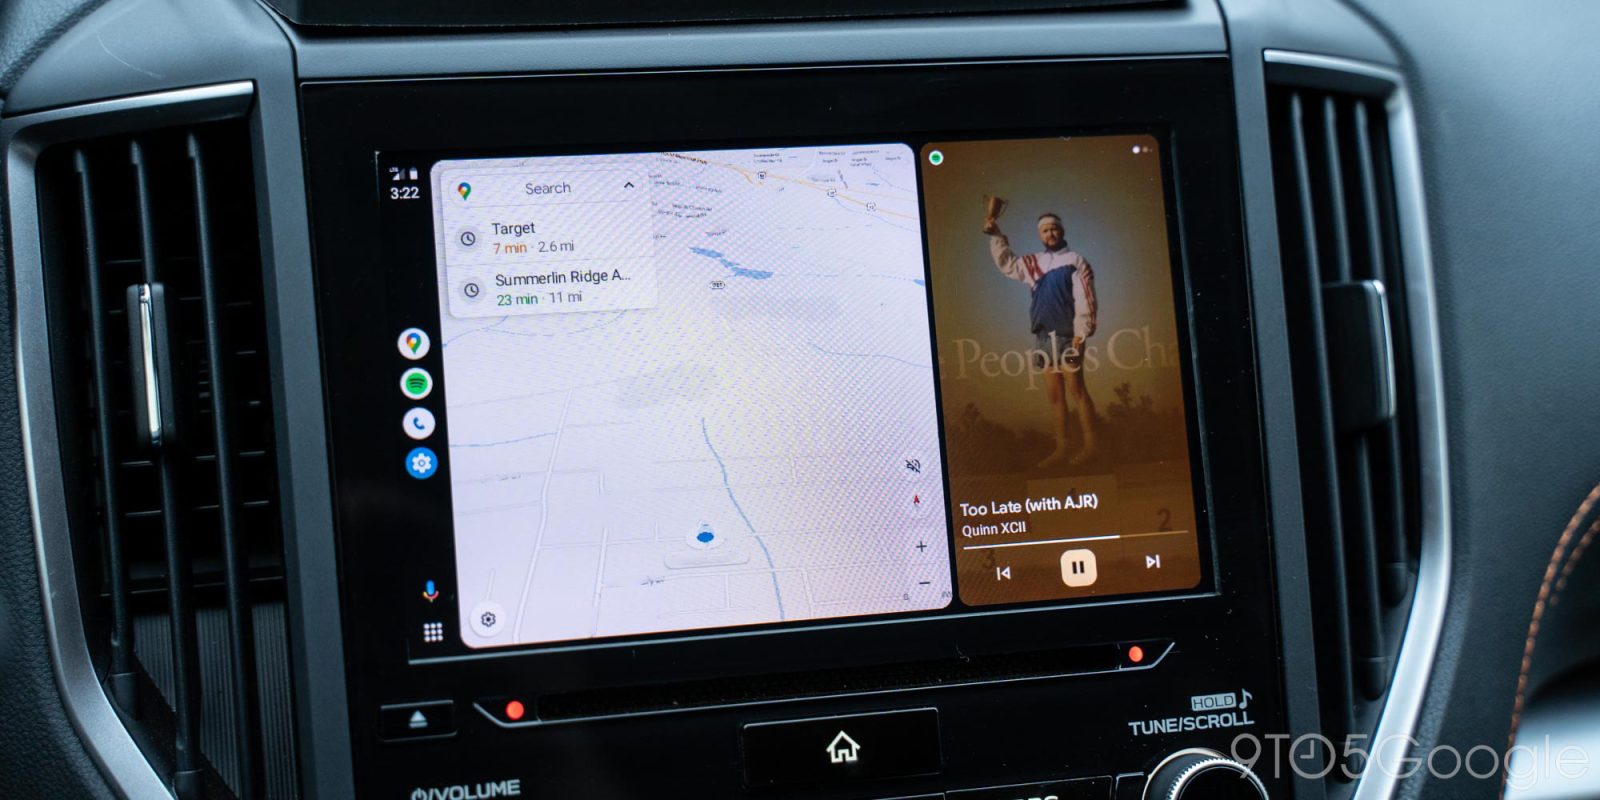 Android Auto’s dashboard view should show multiple apps